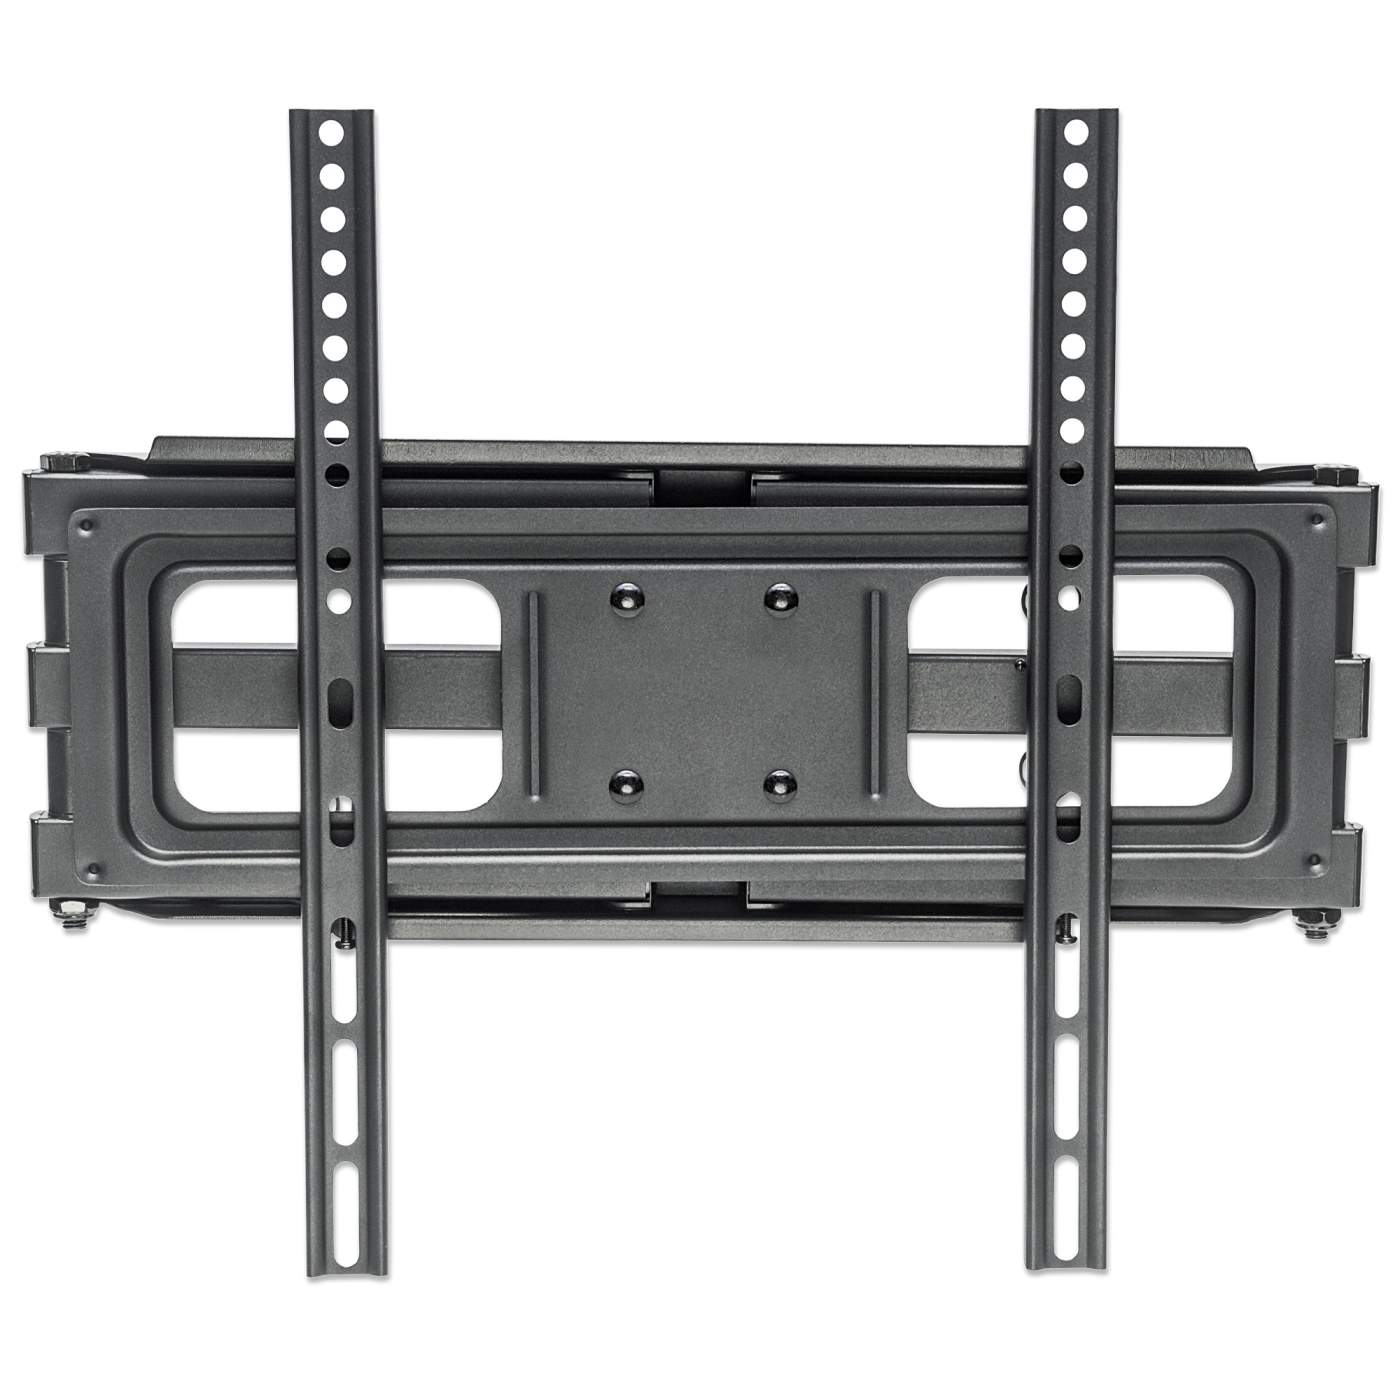 Full-Motion TV Wall Mount with Post-Leveling Adjustment Image 2